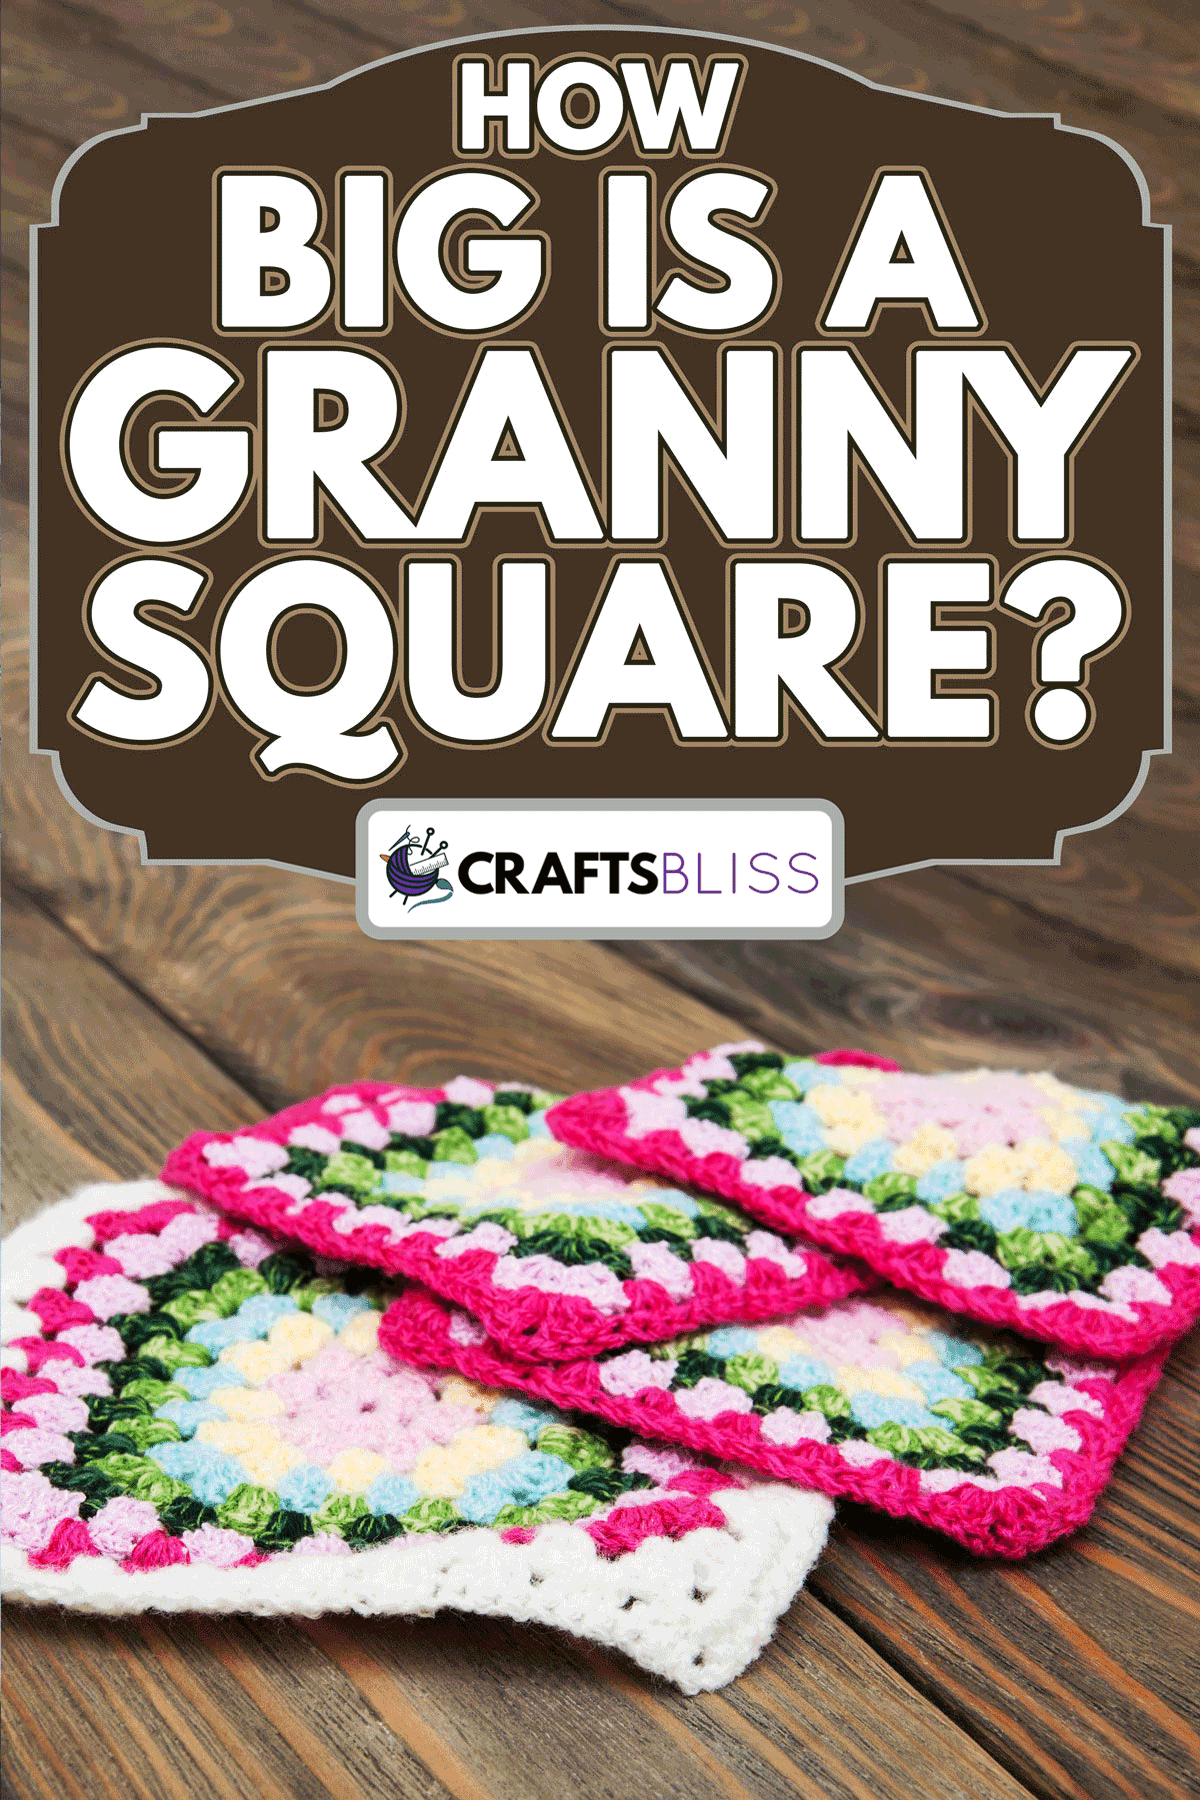 Multicolored plaid squares of crocheted, How Big Is A Granny Square?